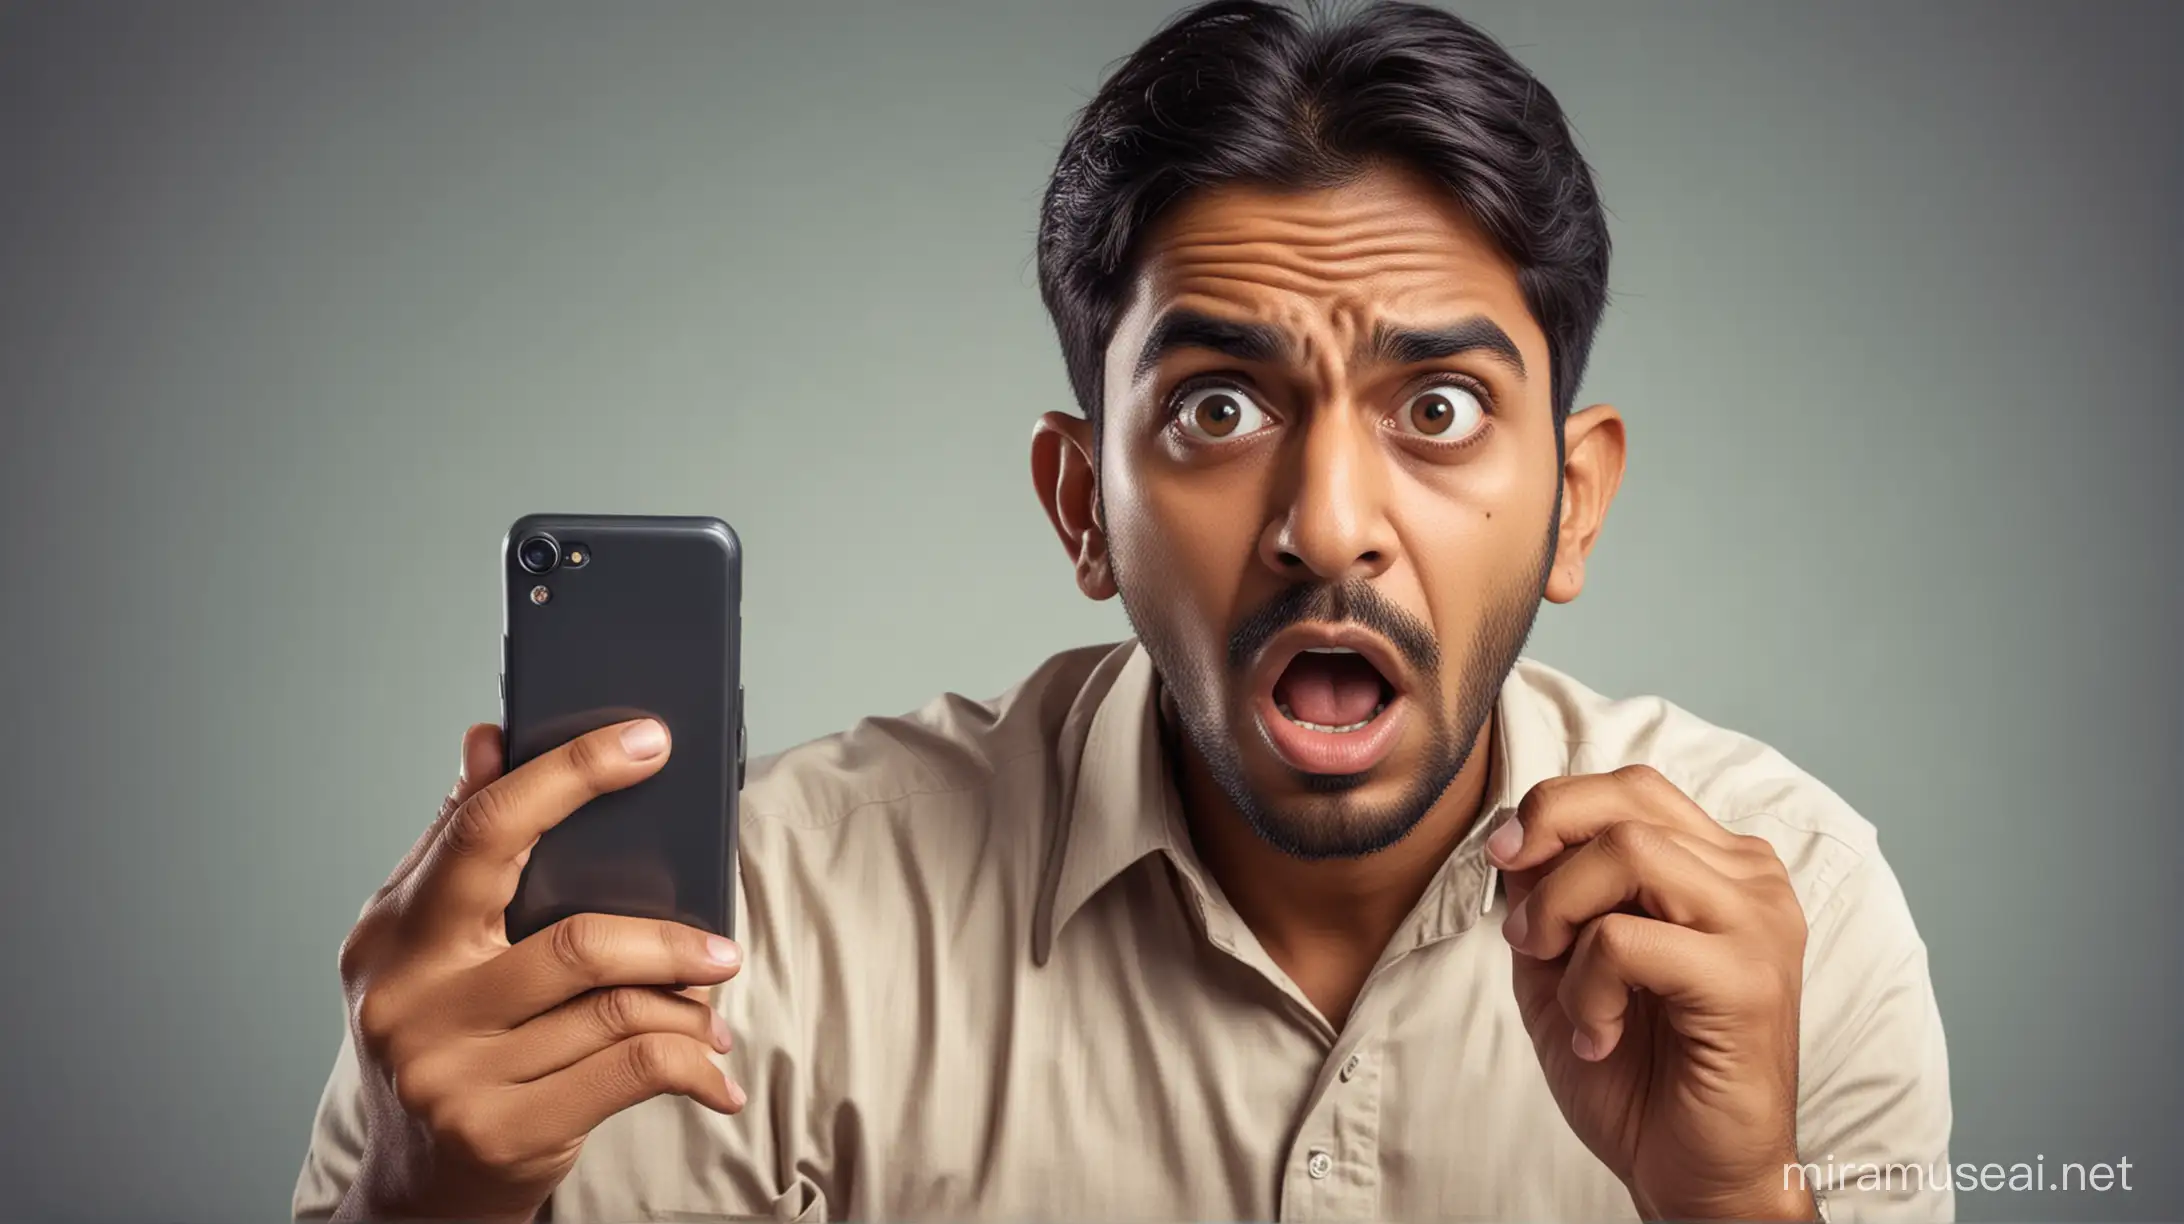 Indian Man Expresses Shock While Viewing Phone Illustrating Concern Over Online Fraud